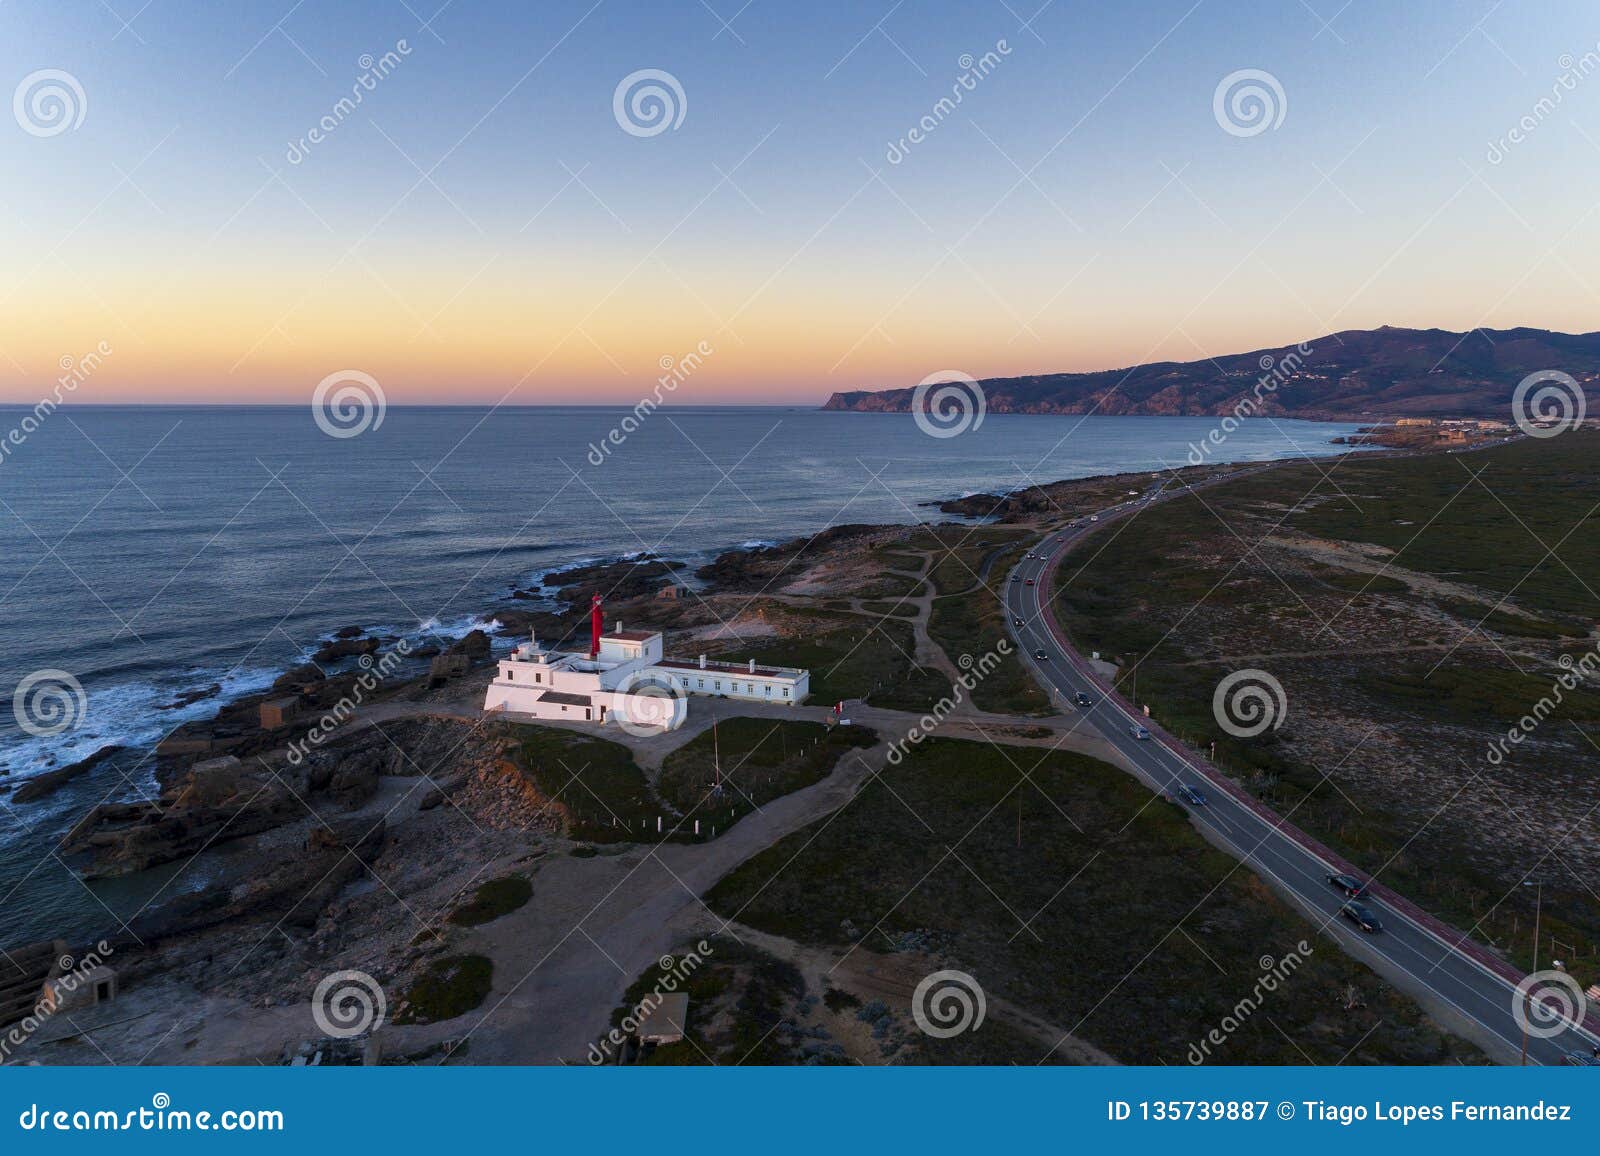 aerial view of the guincho area, with the cabo raso lighthouse, the scenic road along the coast and the roca cape cabo da roca o